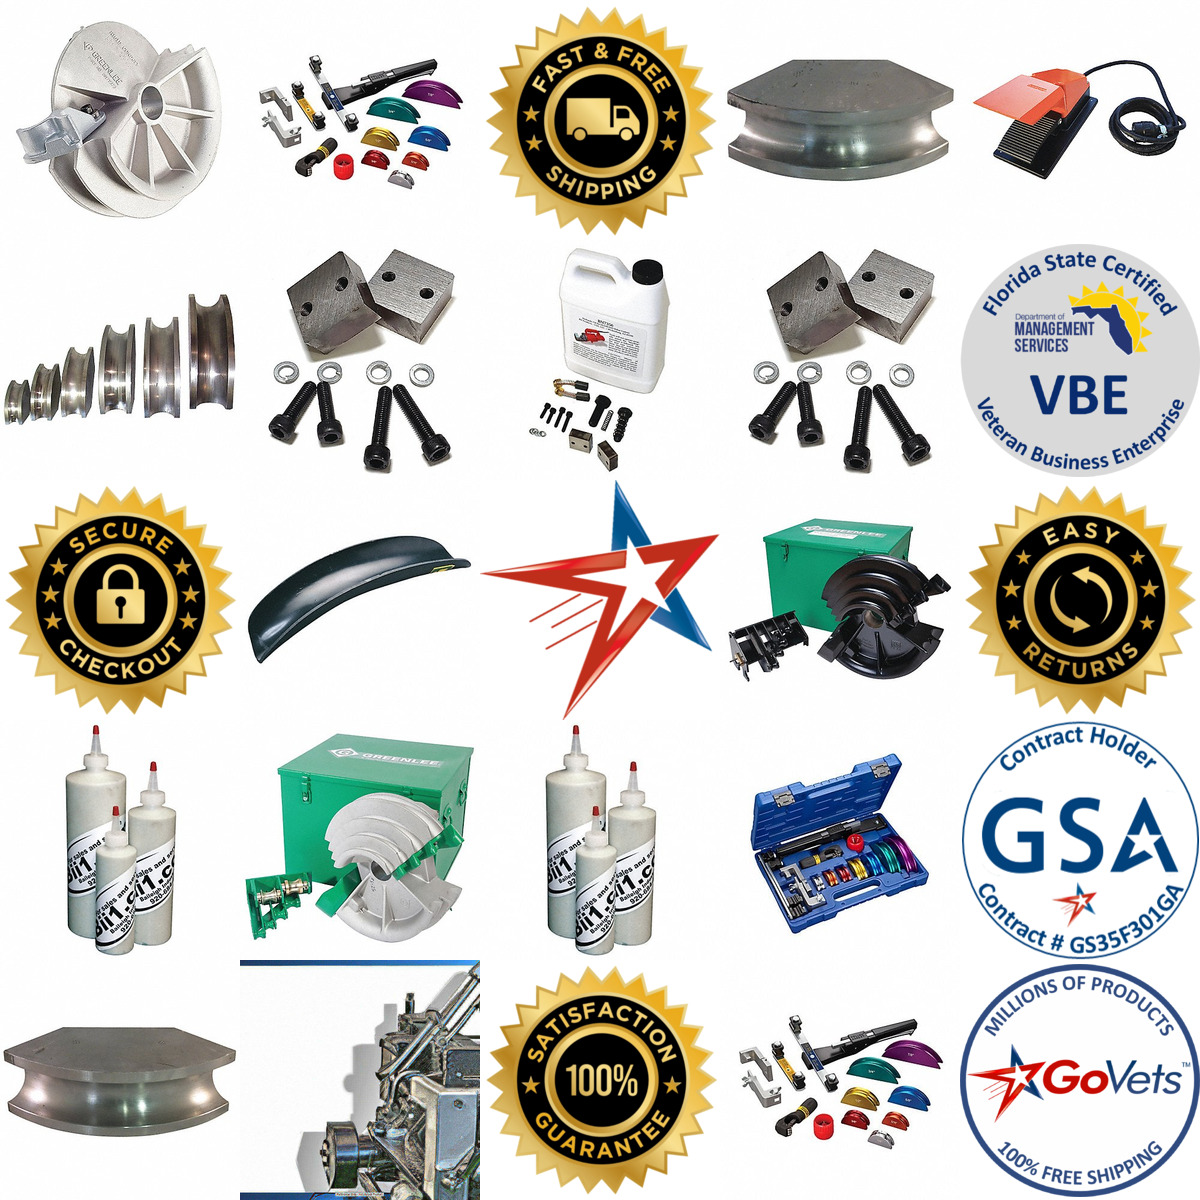 A selection of Bender Accessories products on GoVets